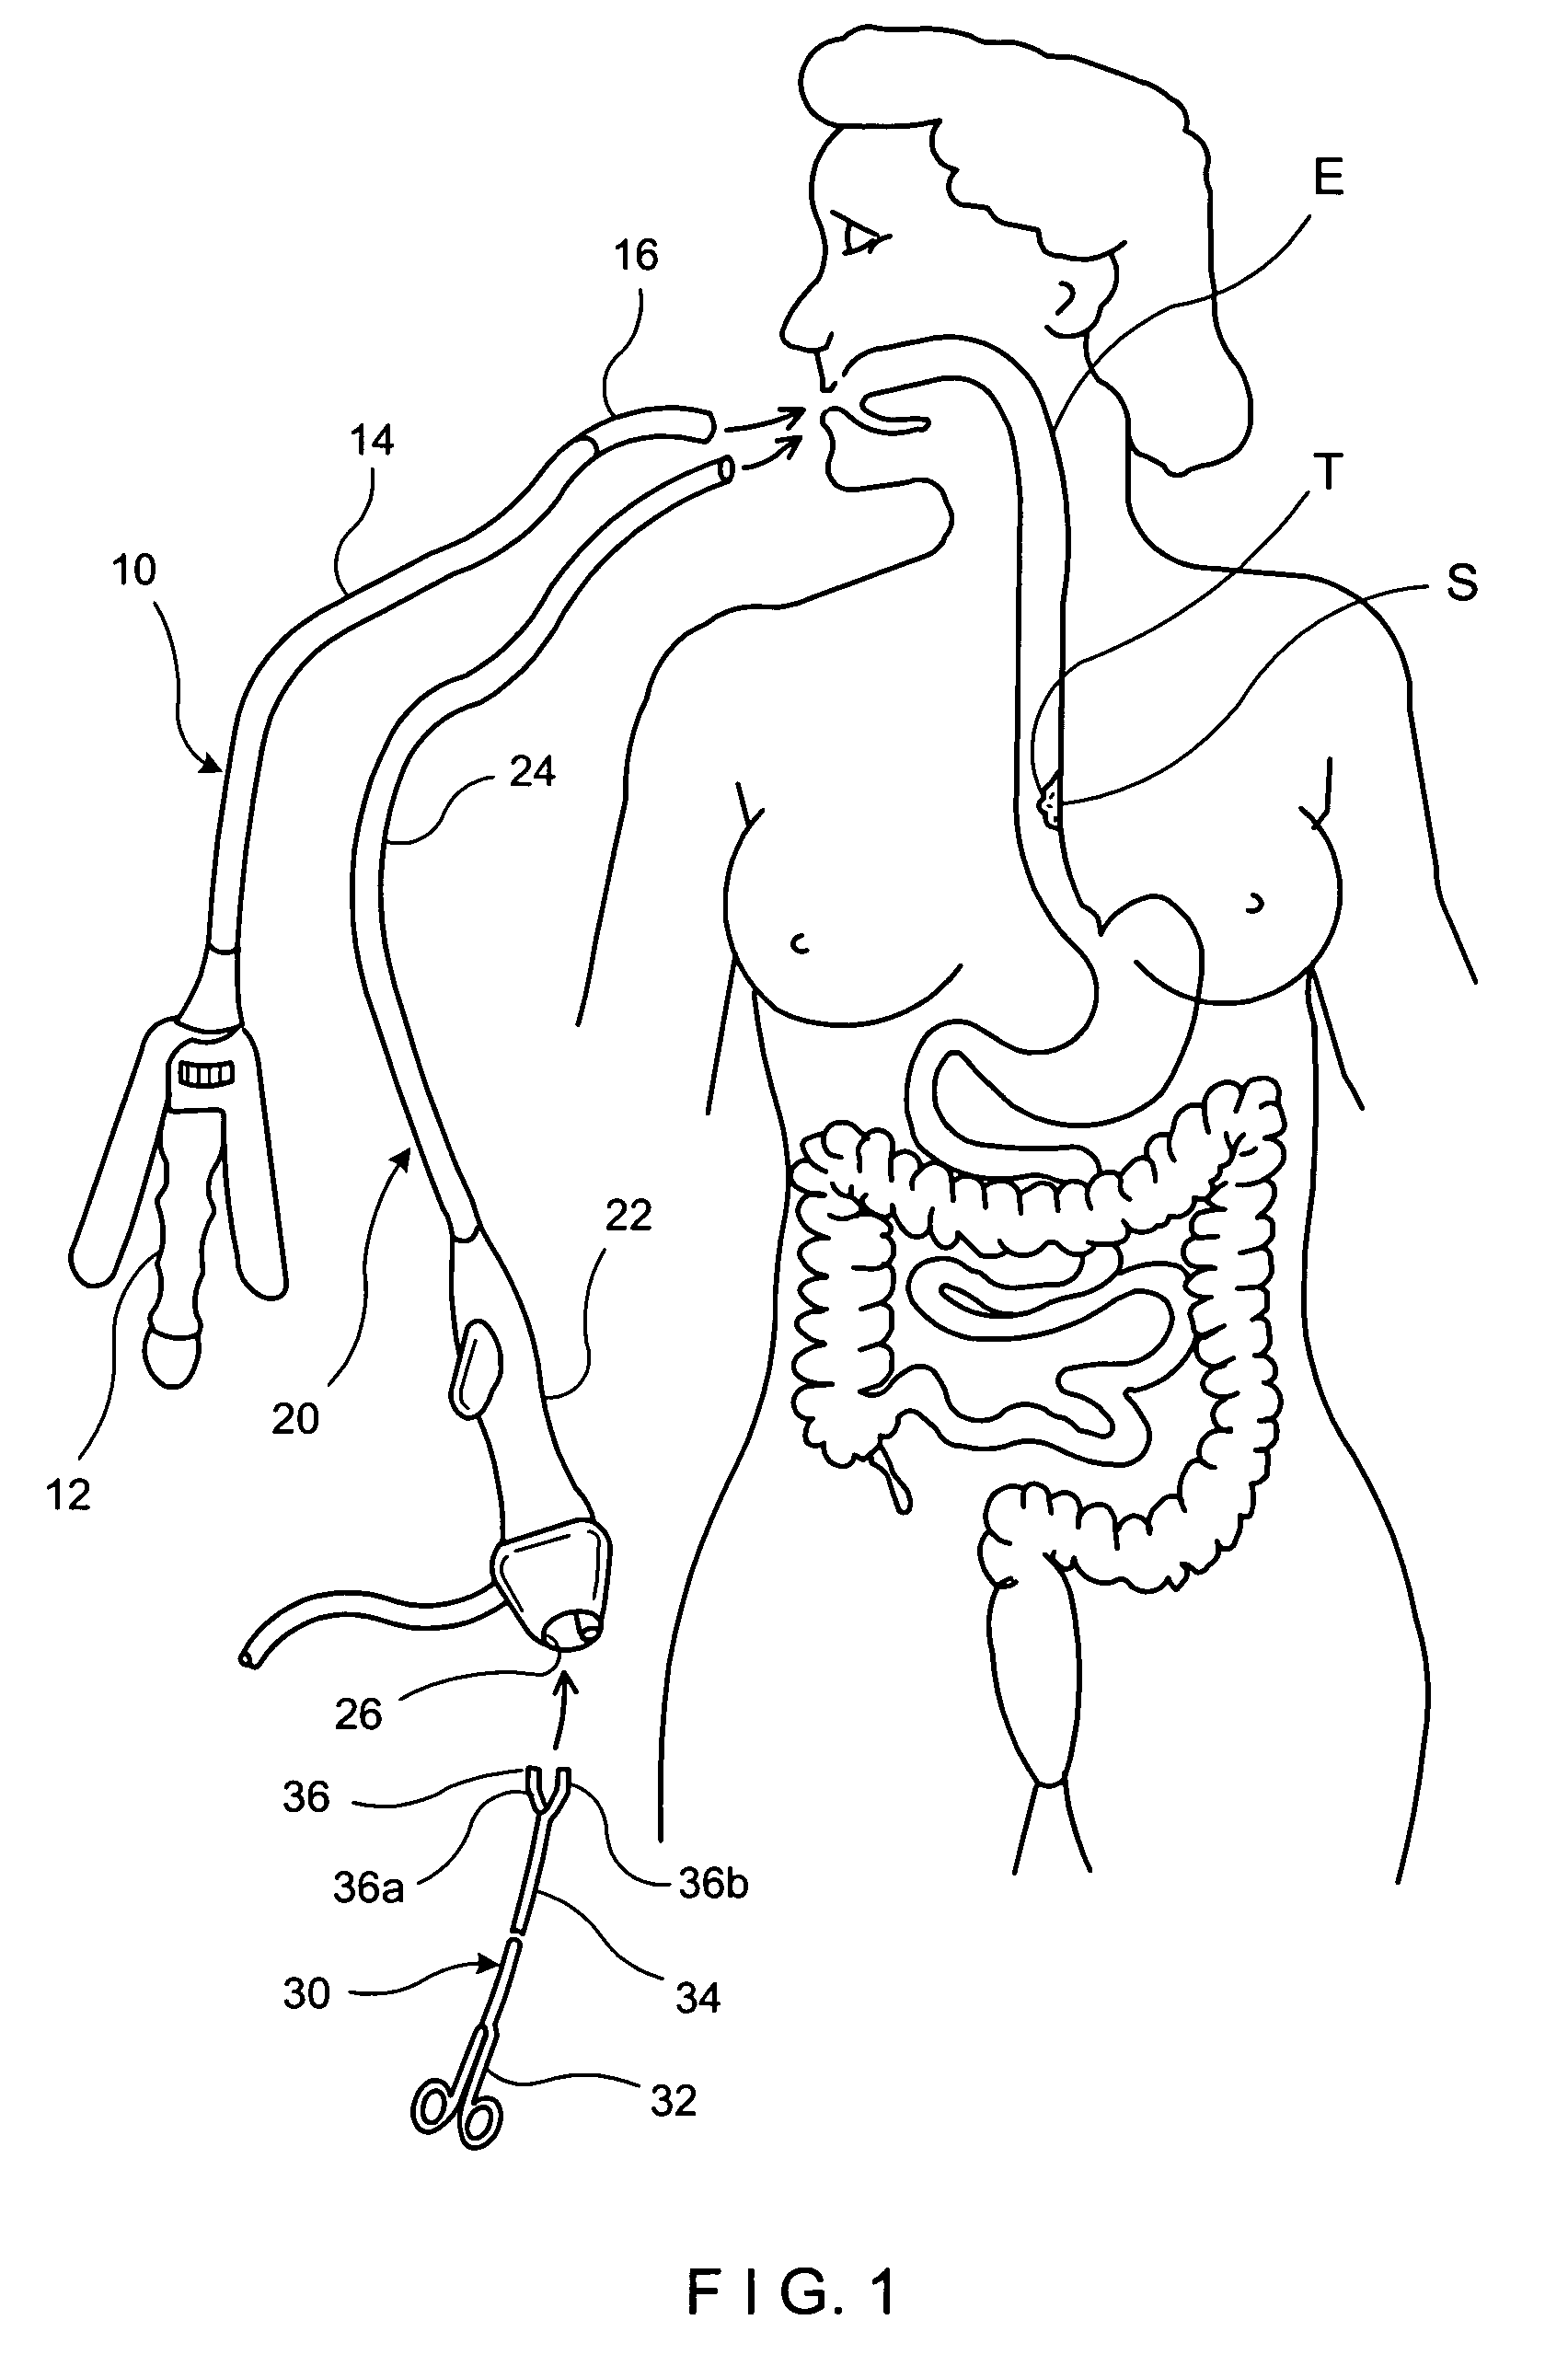 Apparatus and method for resectioning gastro-esophageal tissue